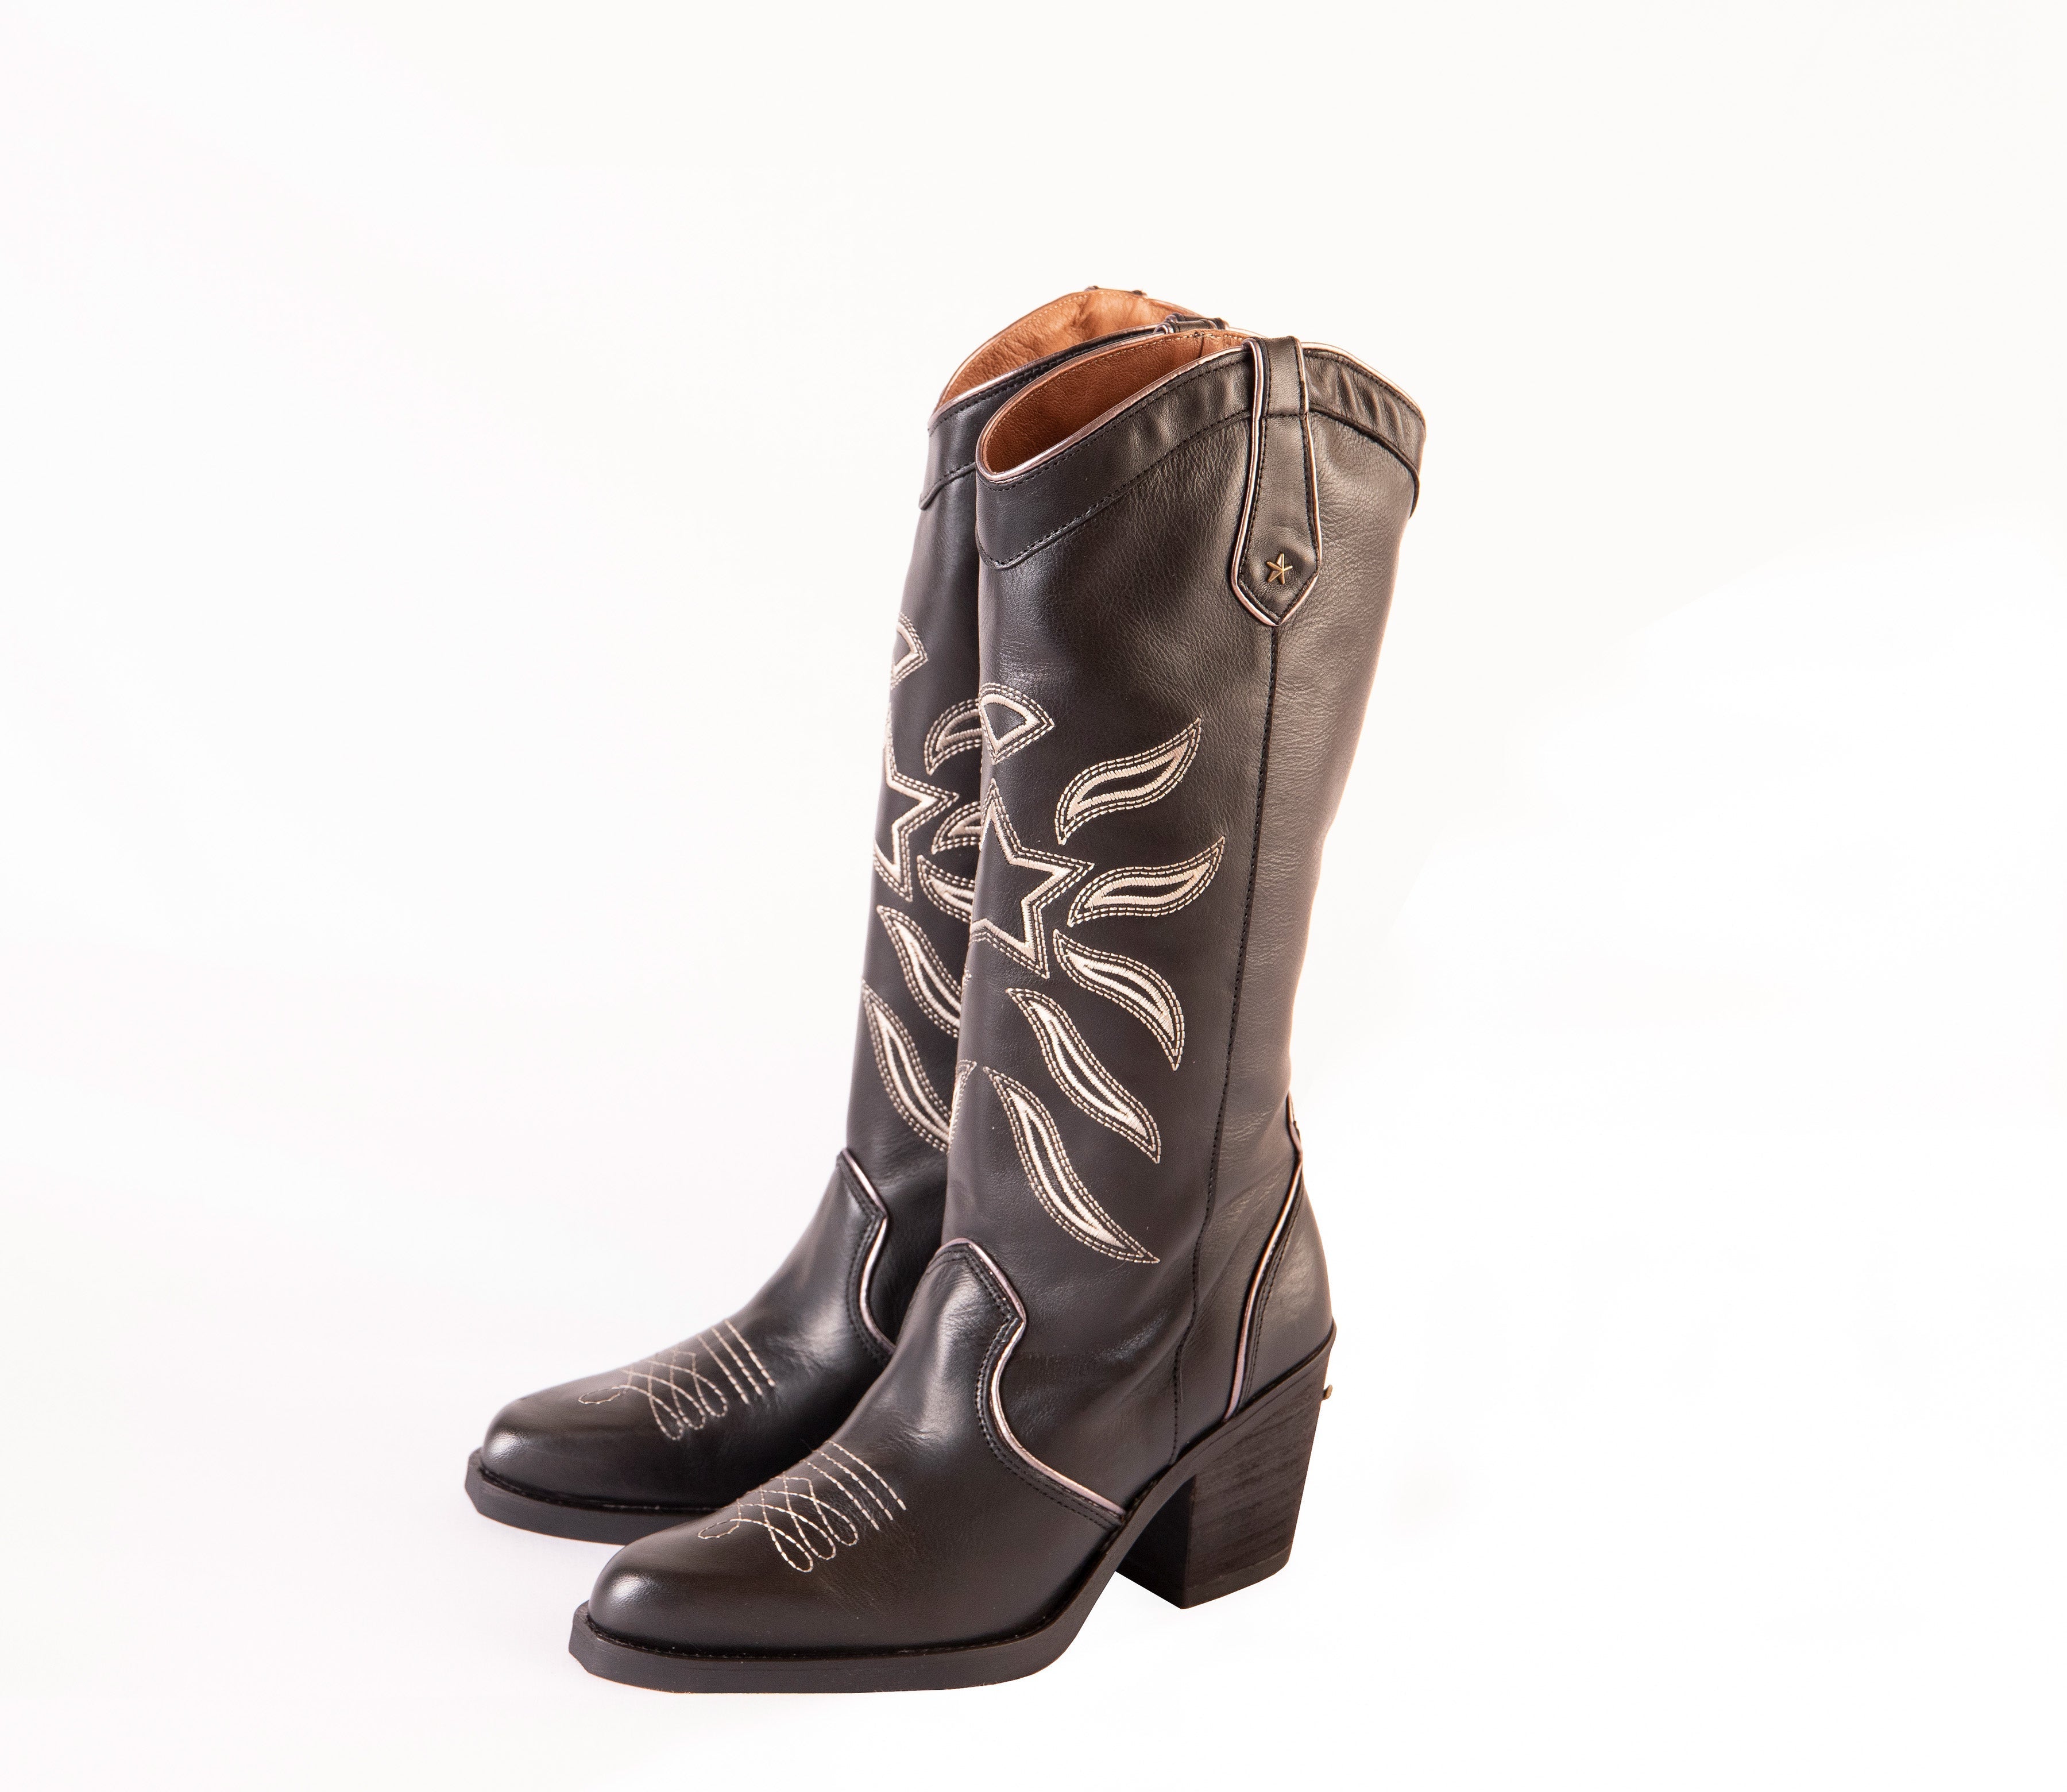 Kansas - black leather boots with star detailing Tall Boots